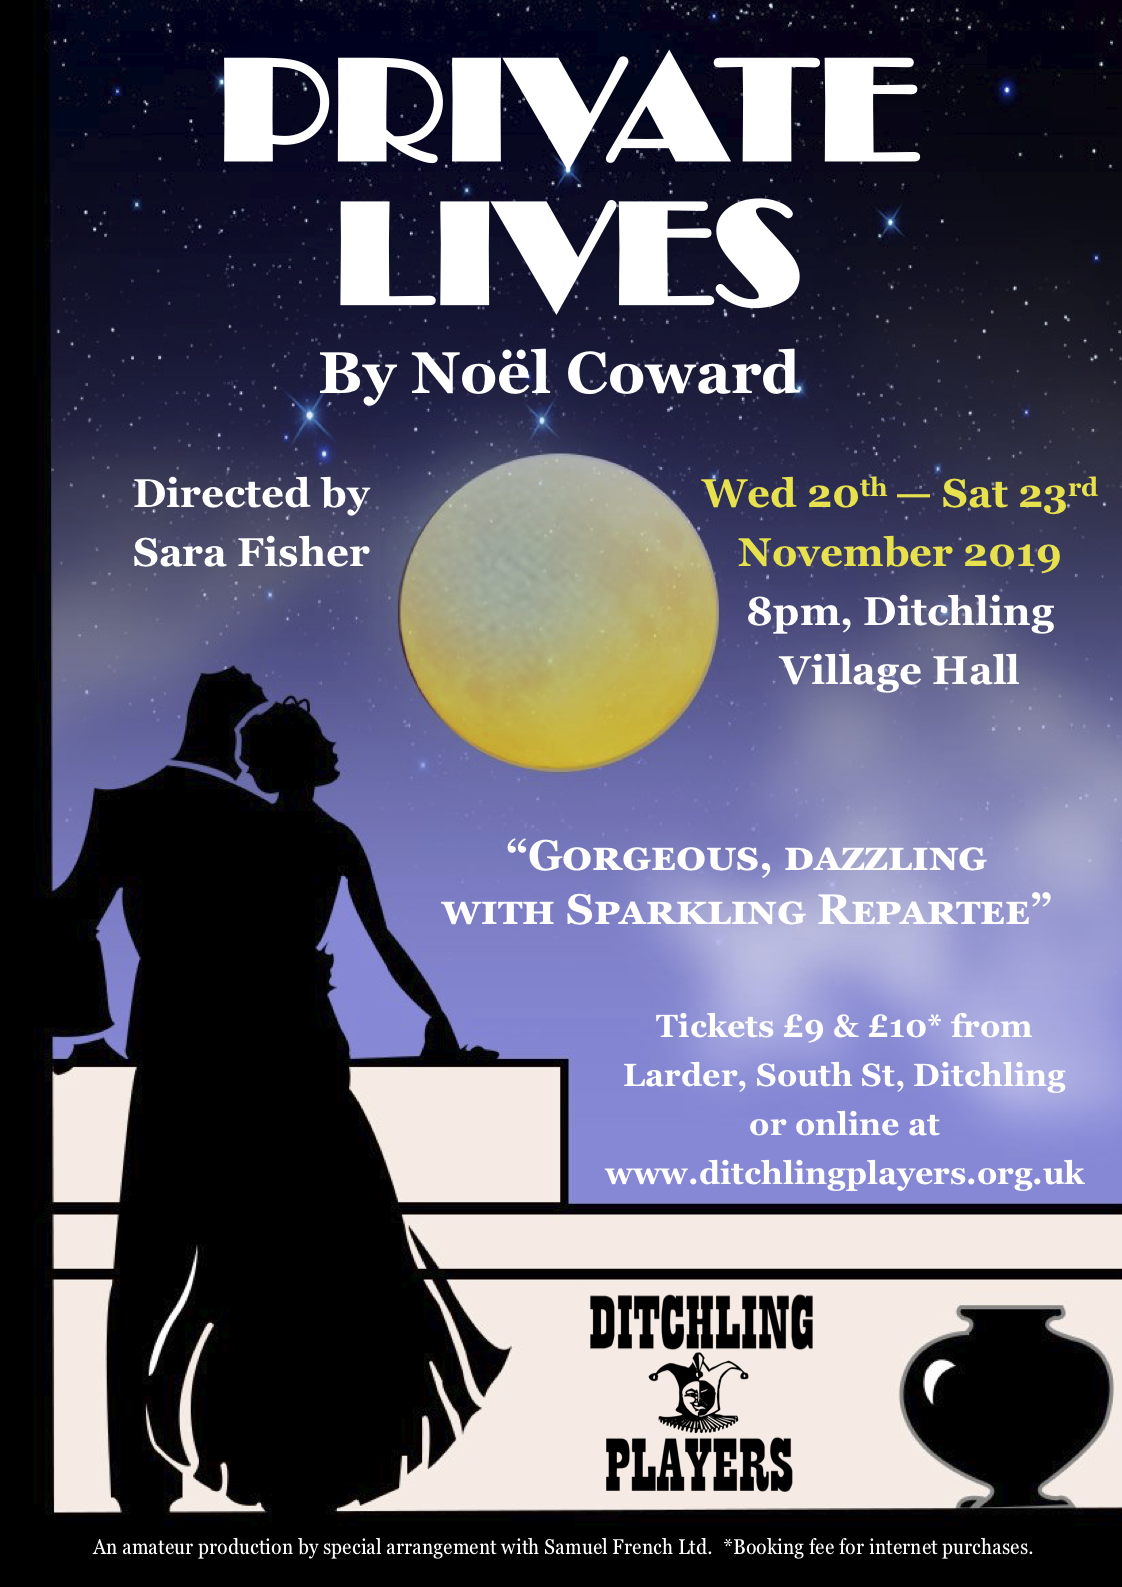 Private Lives by Noel Coward Show Poster